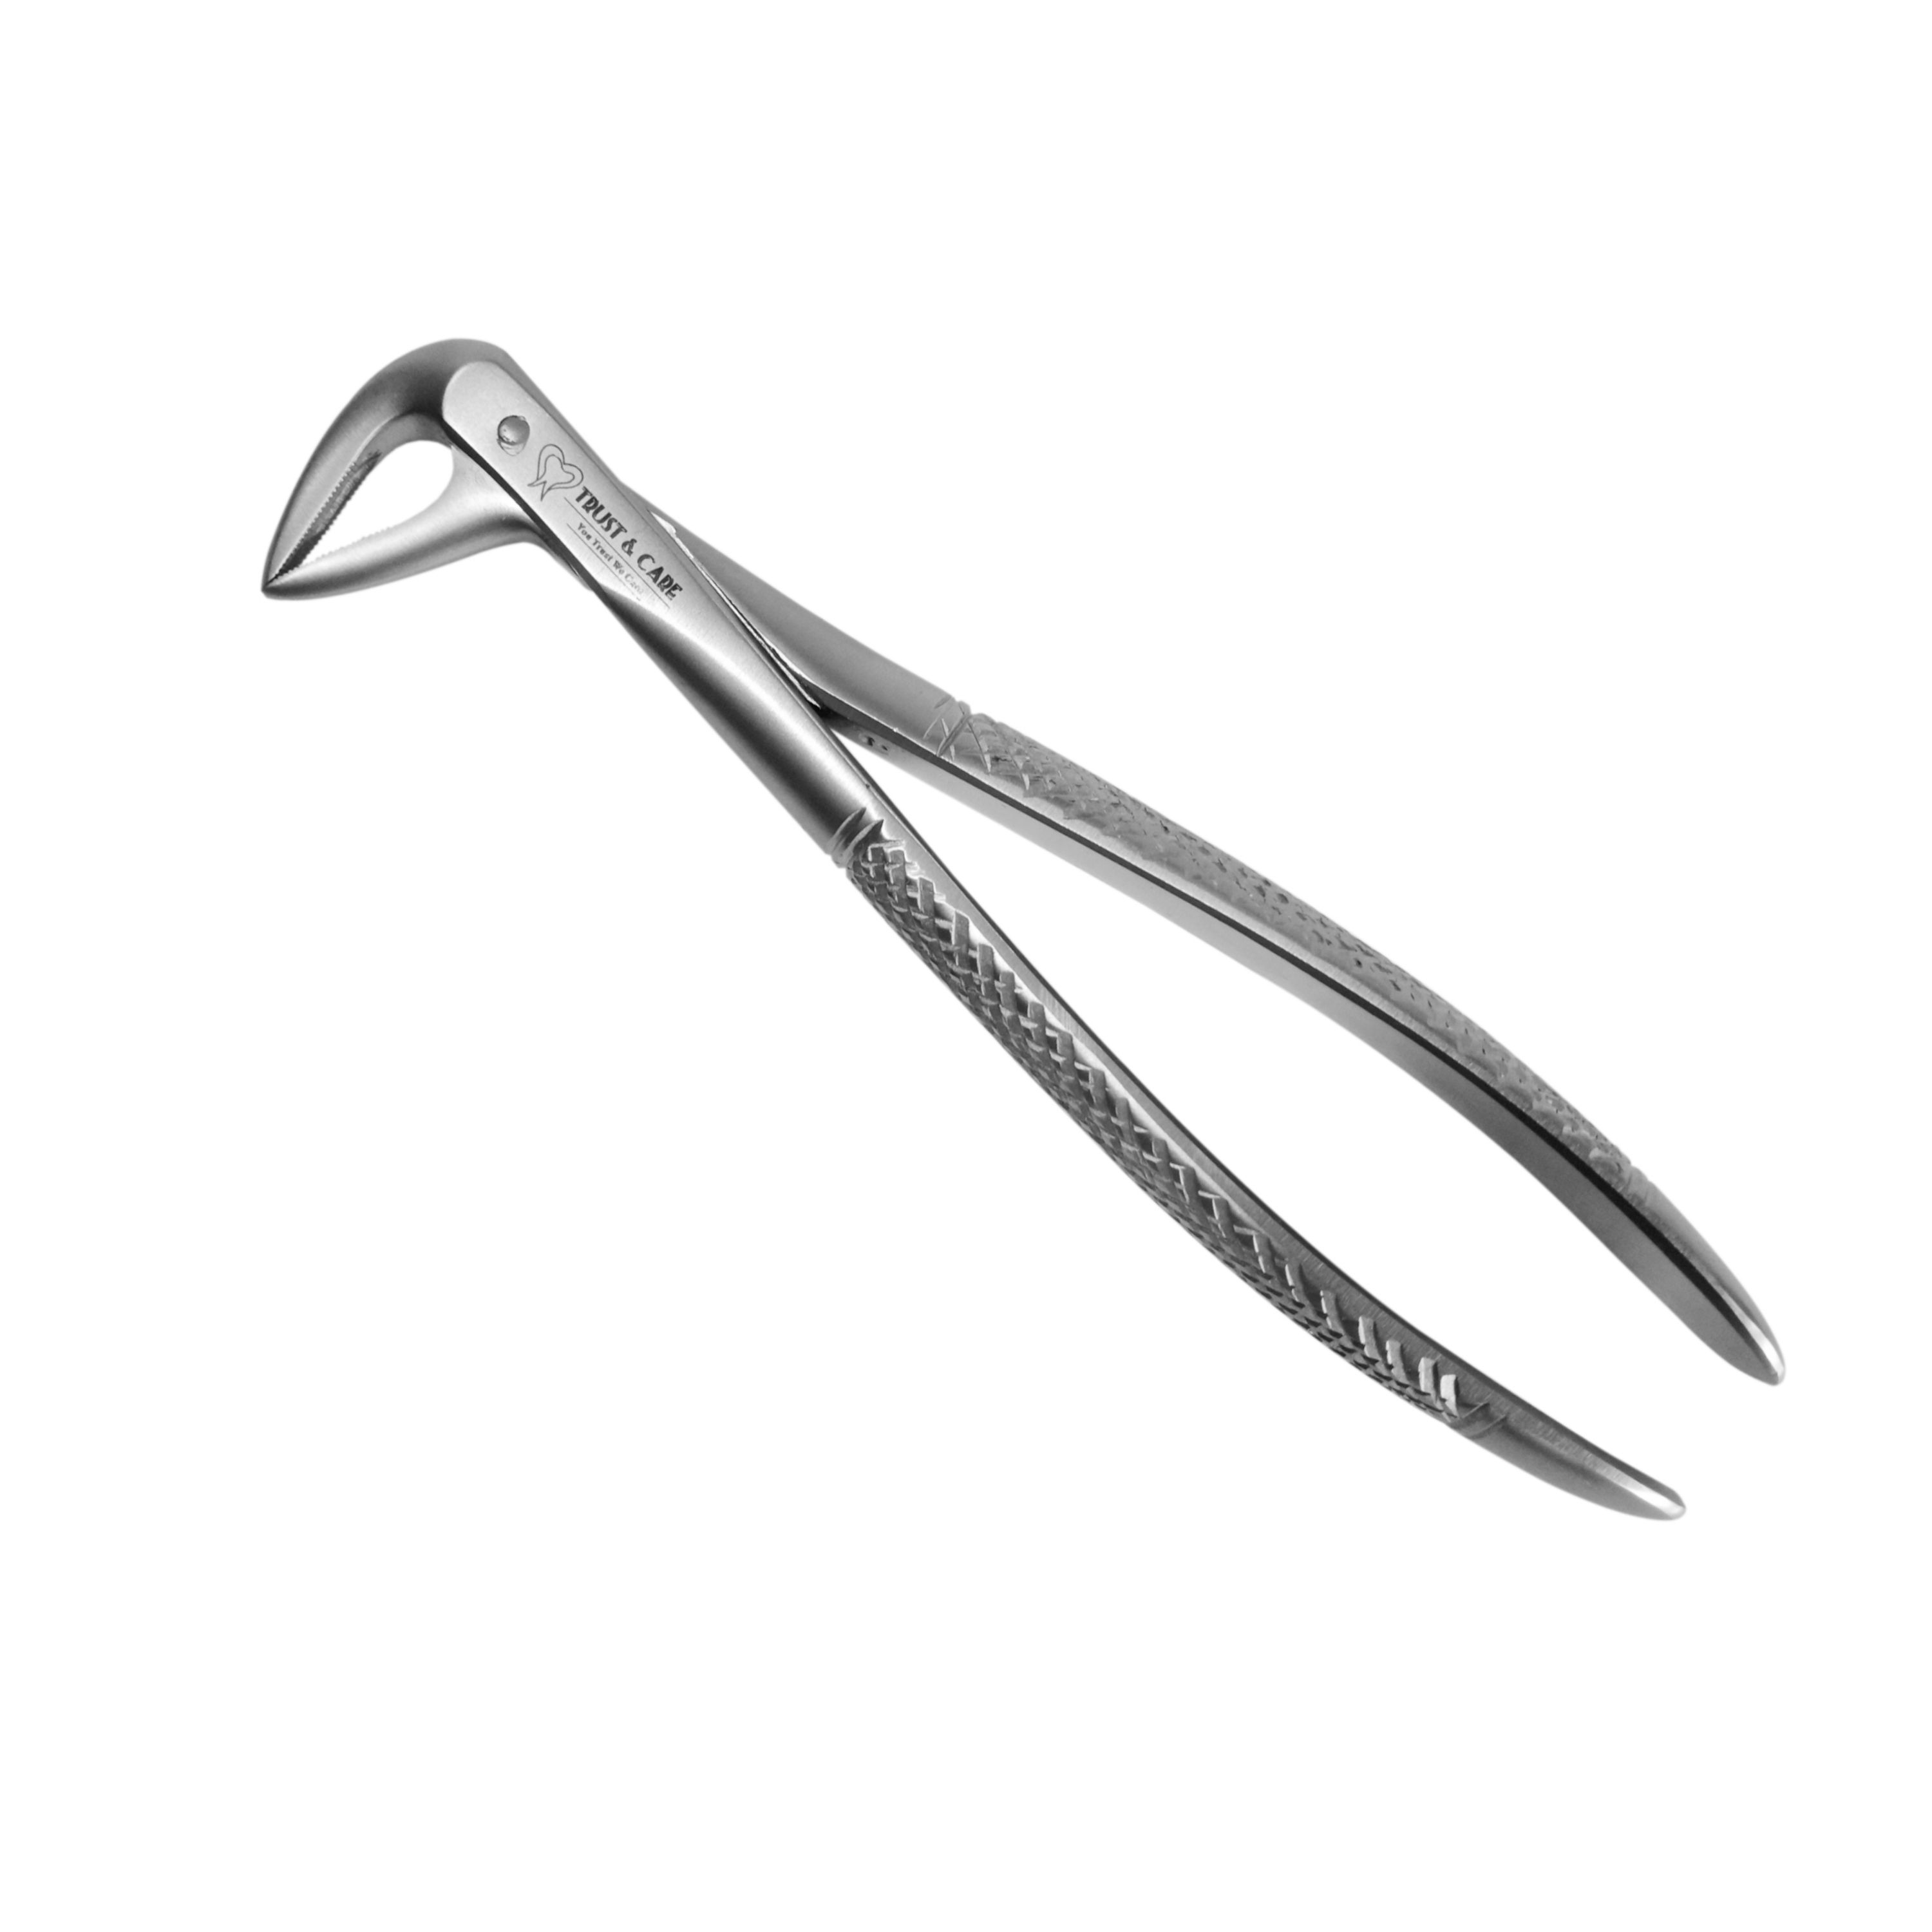 Trust & Care Tooth Extraction Forcep Lower Roots Fig No. 74N Standard